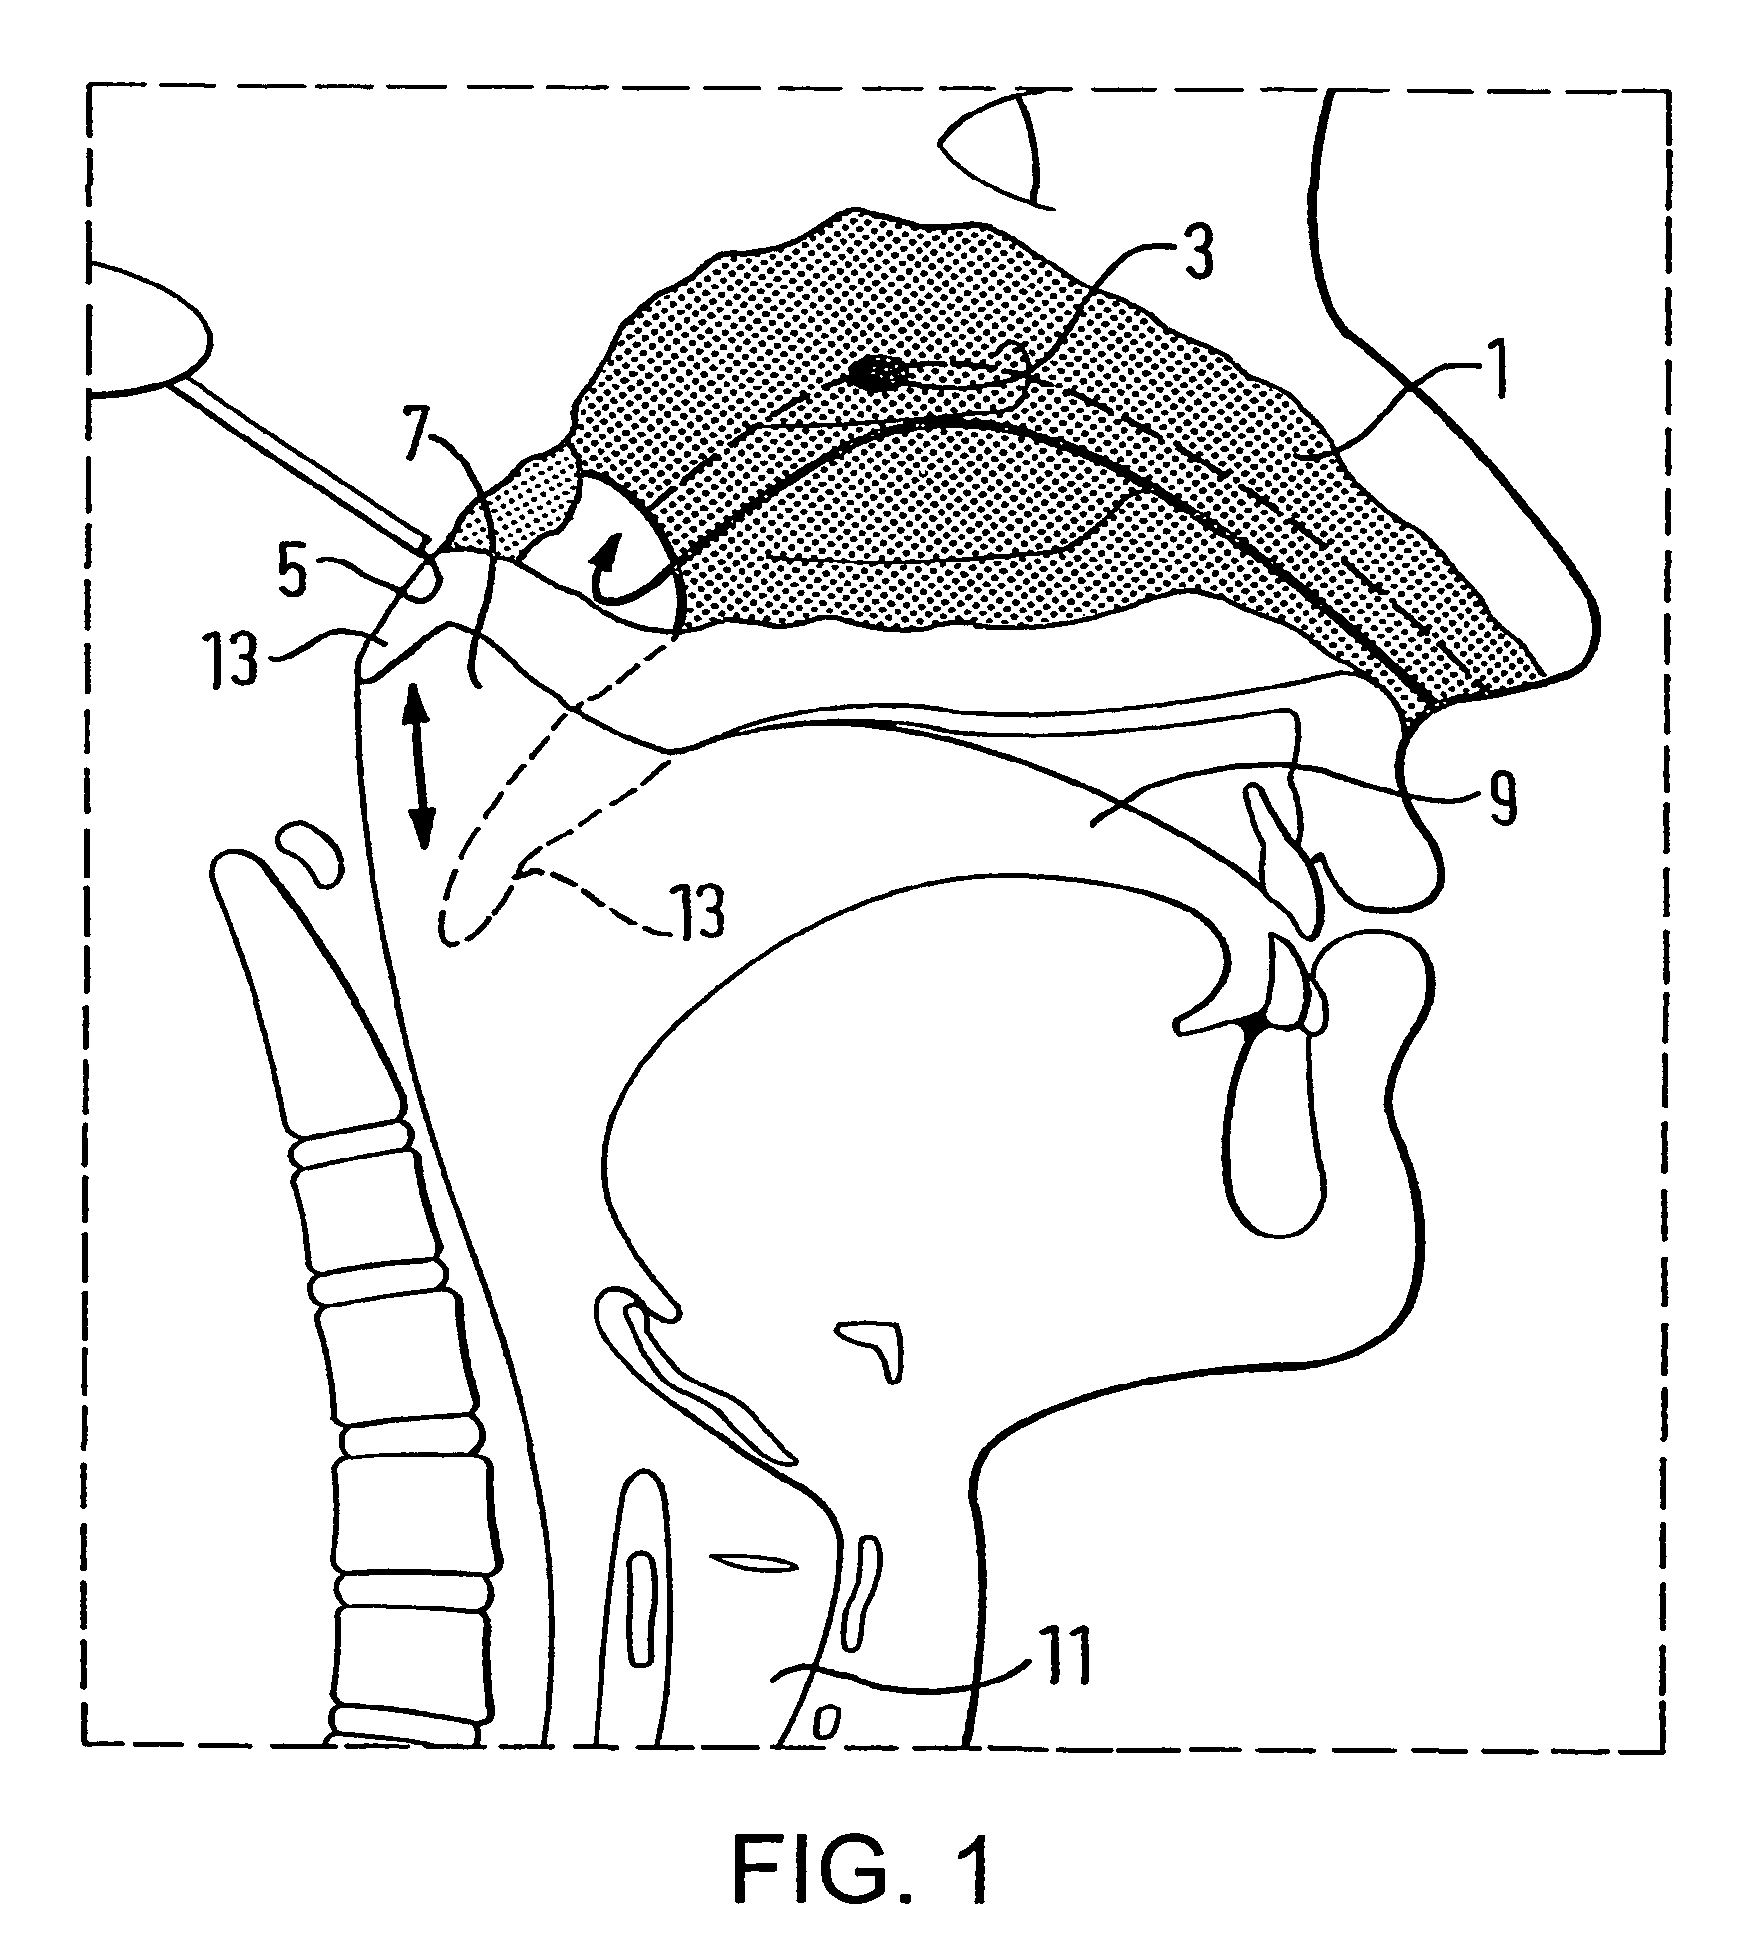 Nasal delivery devices